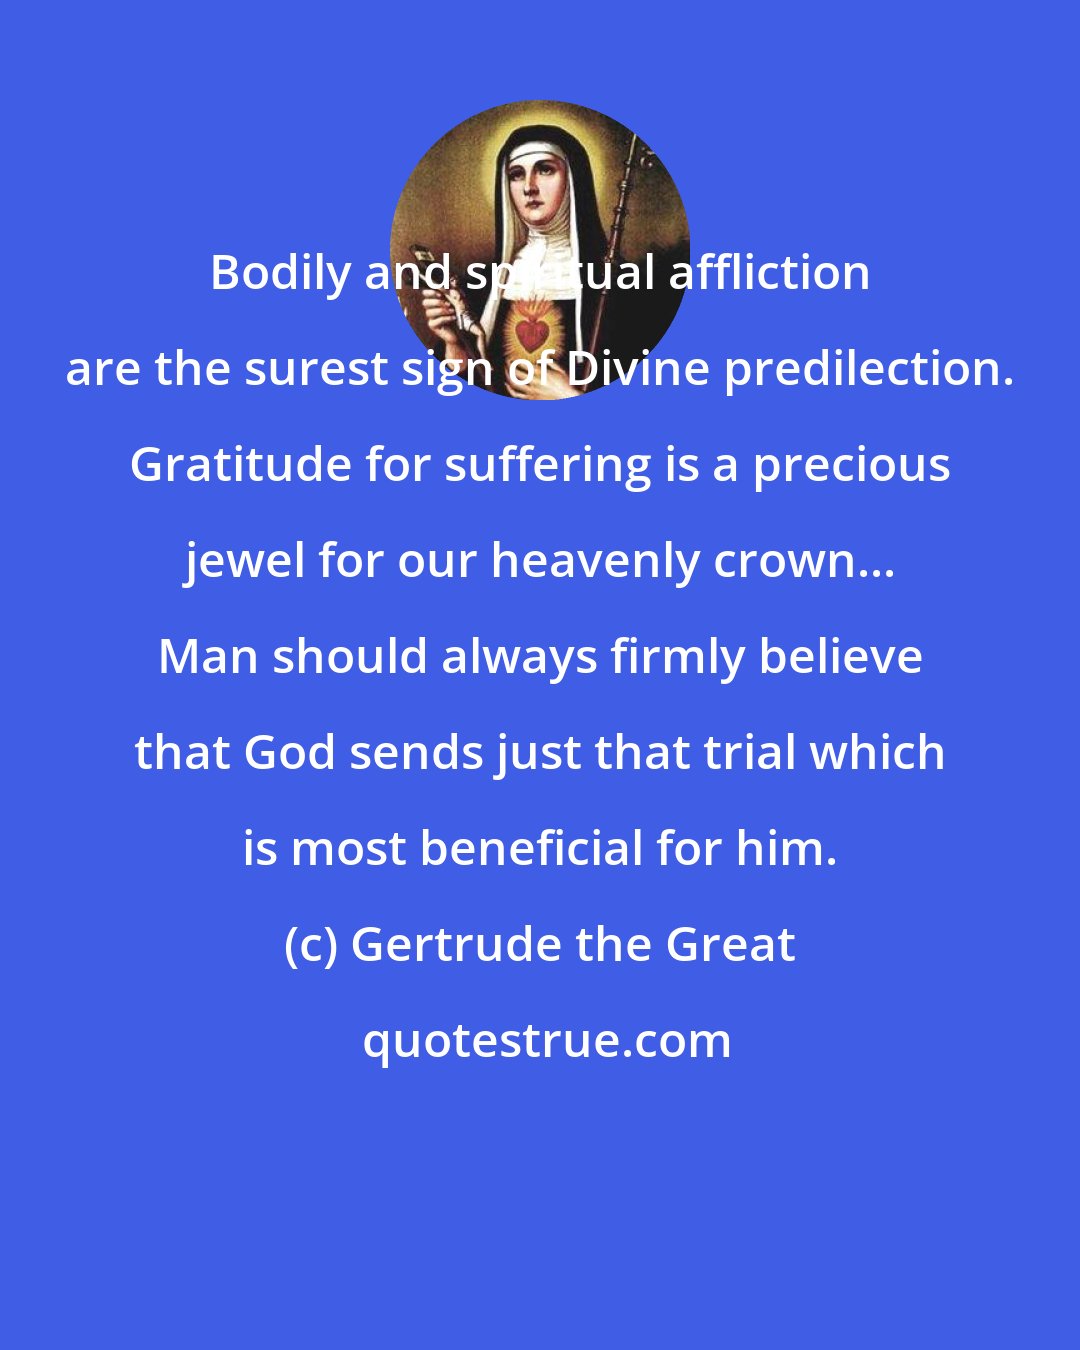 Gertrude the Great: Bodily and spiritual affliction are the surest sign of Divine predilection. Gratitude for suffering is a precious jewel for our heavenly crown... Man should always firmly believe that God sends just that trial which is most beneficial for him.